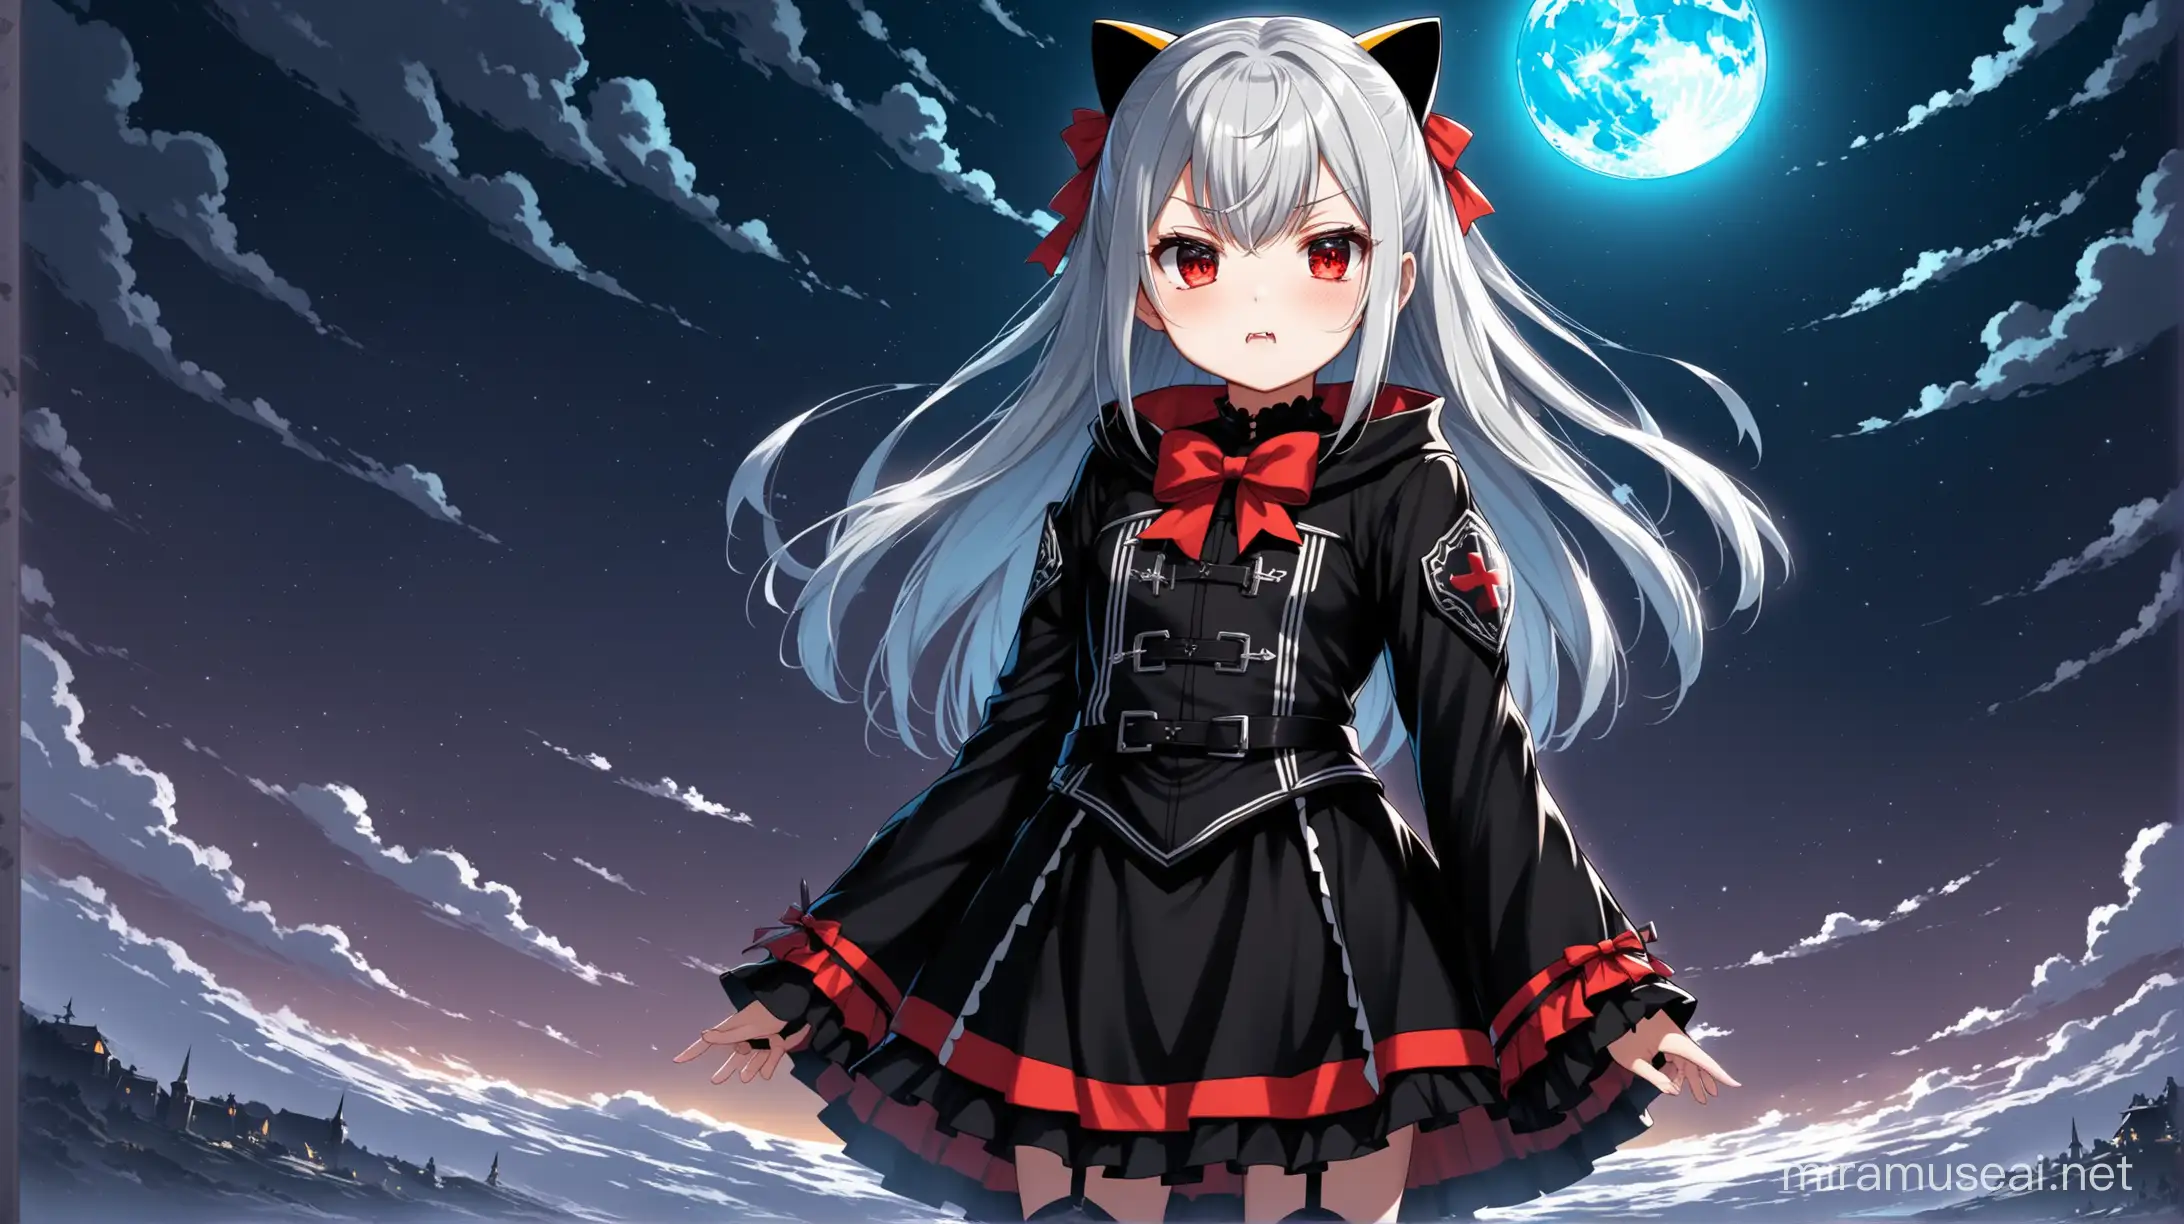 Elegant Vampire Girl with Silver Hair and Red Eyes at Night